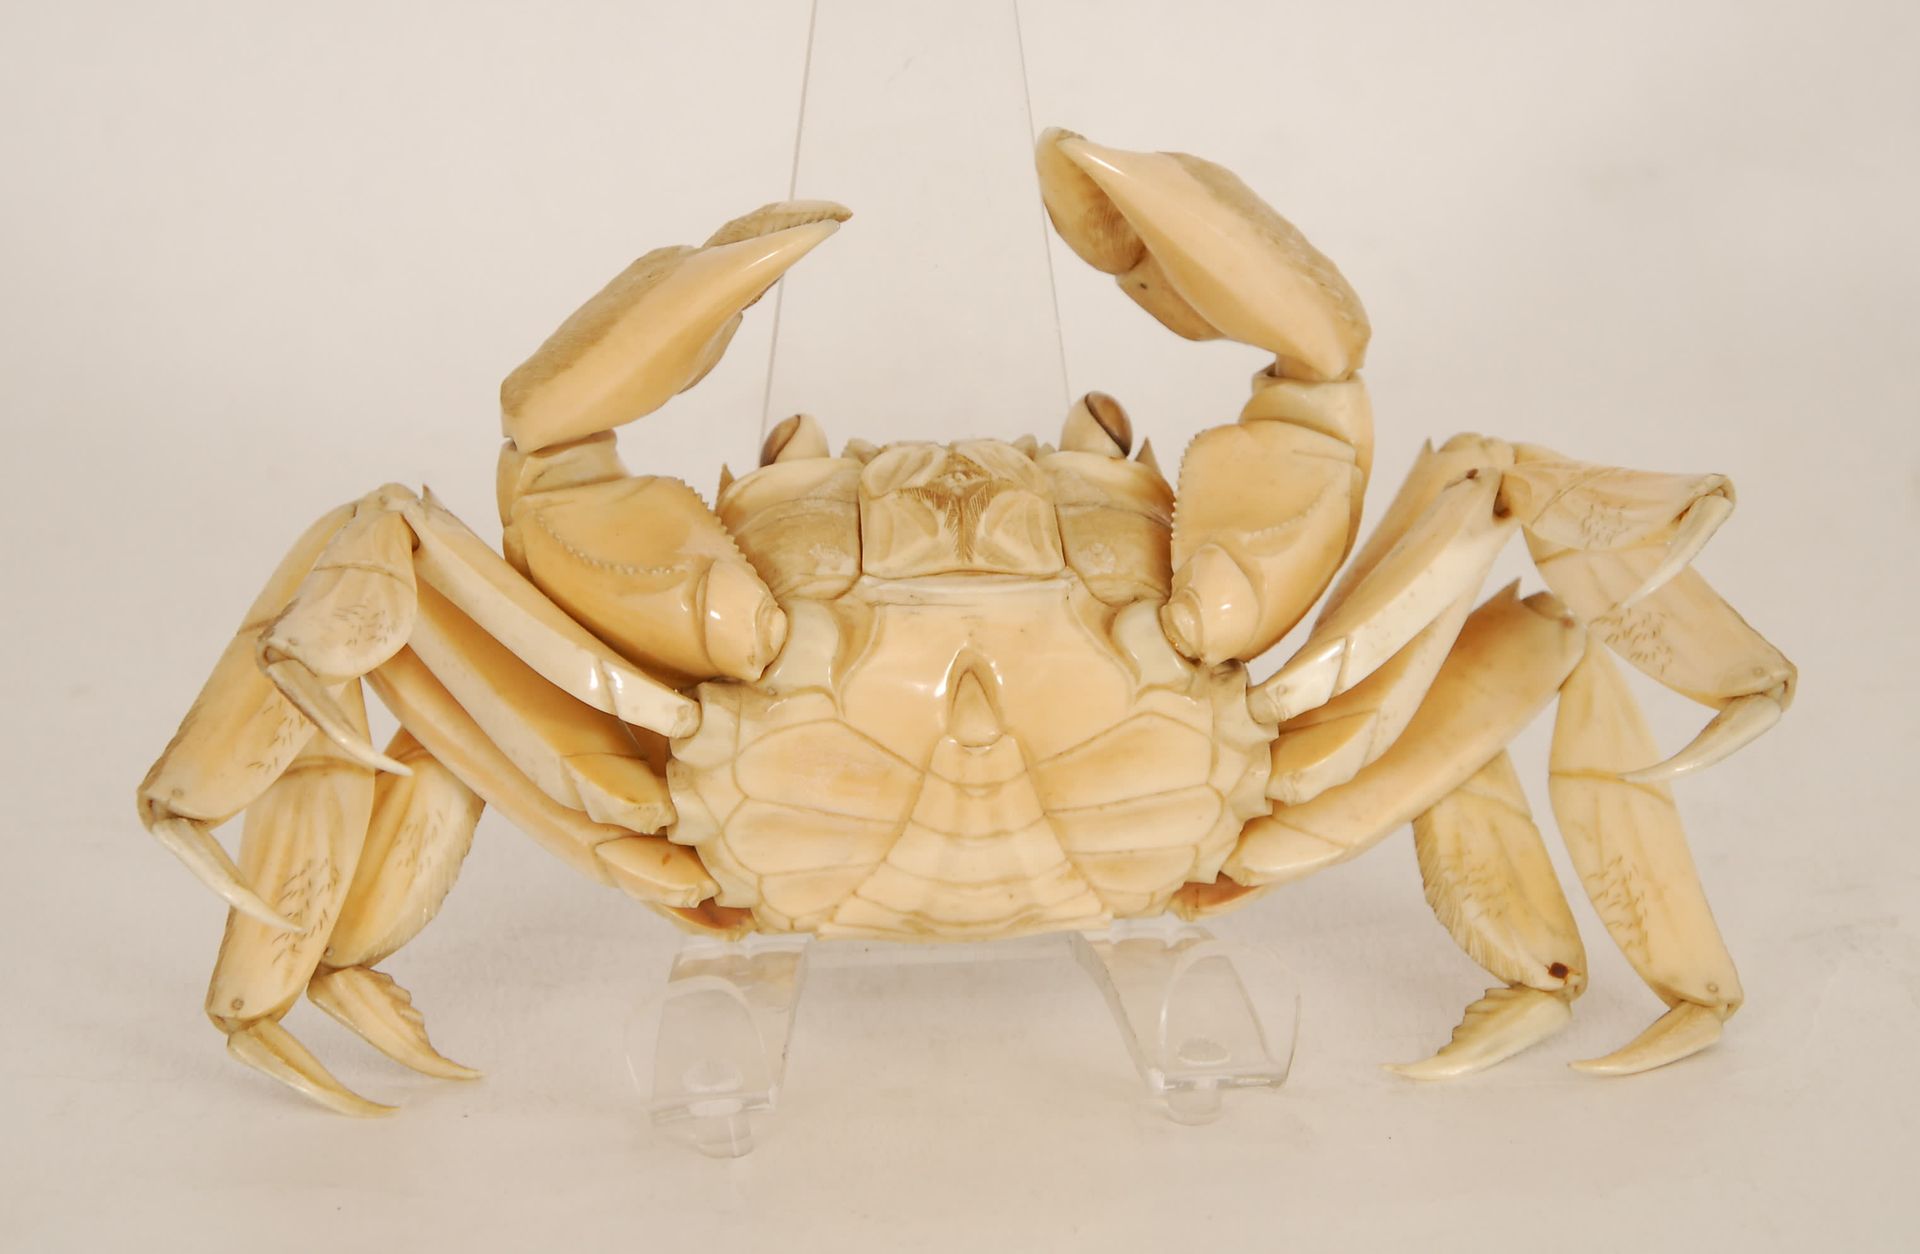 Null A crab
Sculpted ivory. Japan, 19th century.
6 x 25 x 13 cm.
All prospective&hellip;